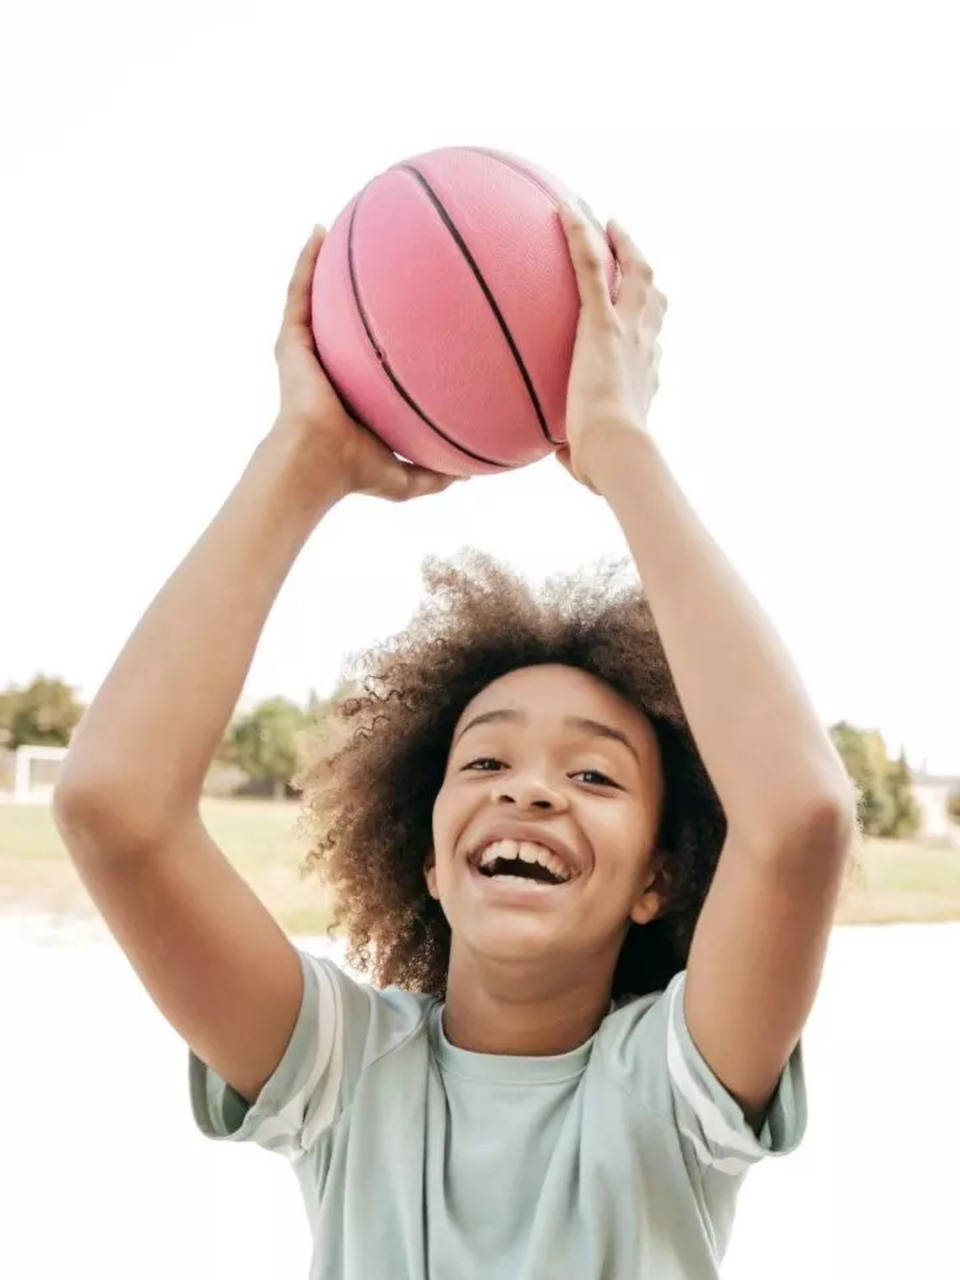 Best sports to increase your child's height